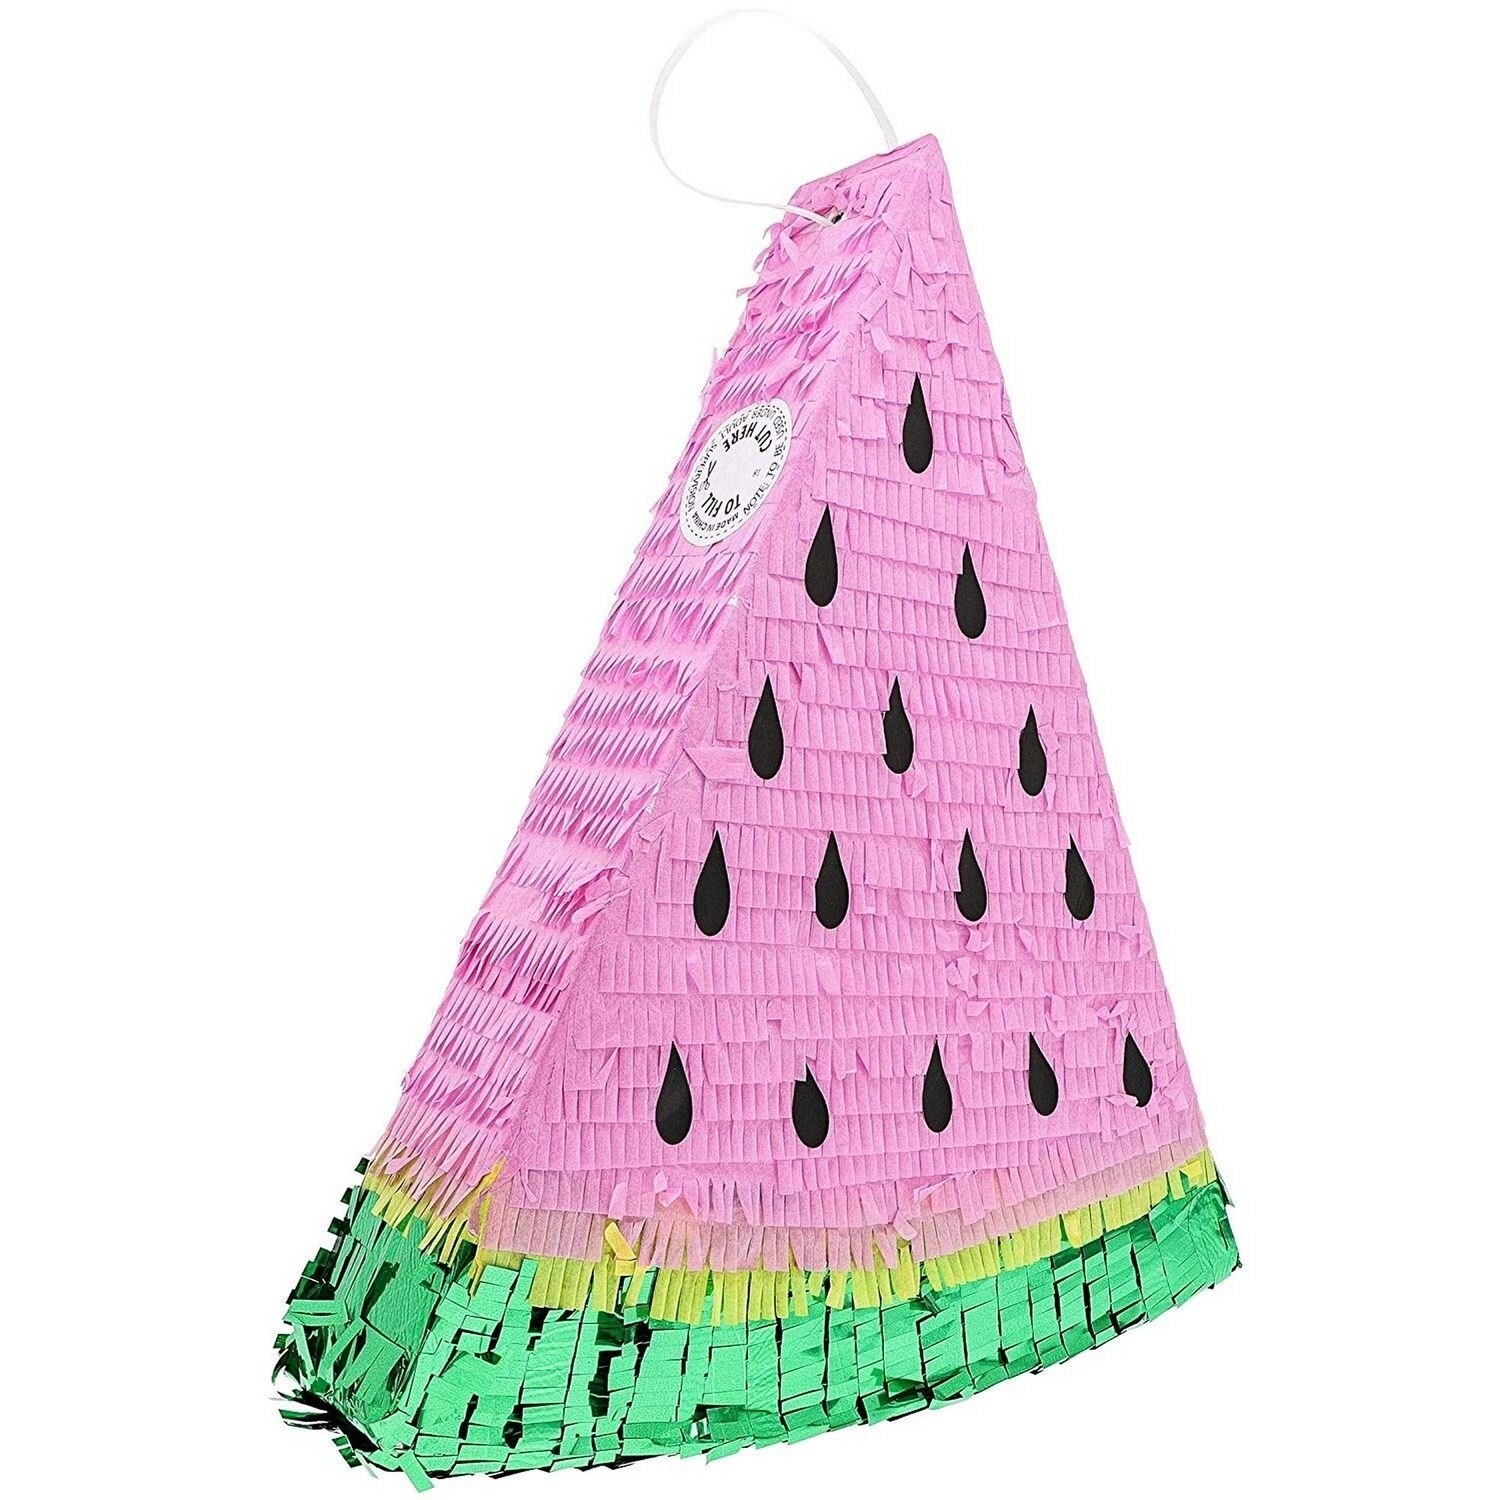 Juvale Small Fruit Watermelon Slice Pinata Hawaiian Luau and Tropical Party Supplies 17 x 14.5 x 3 Inches